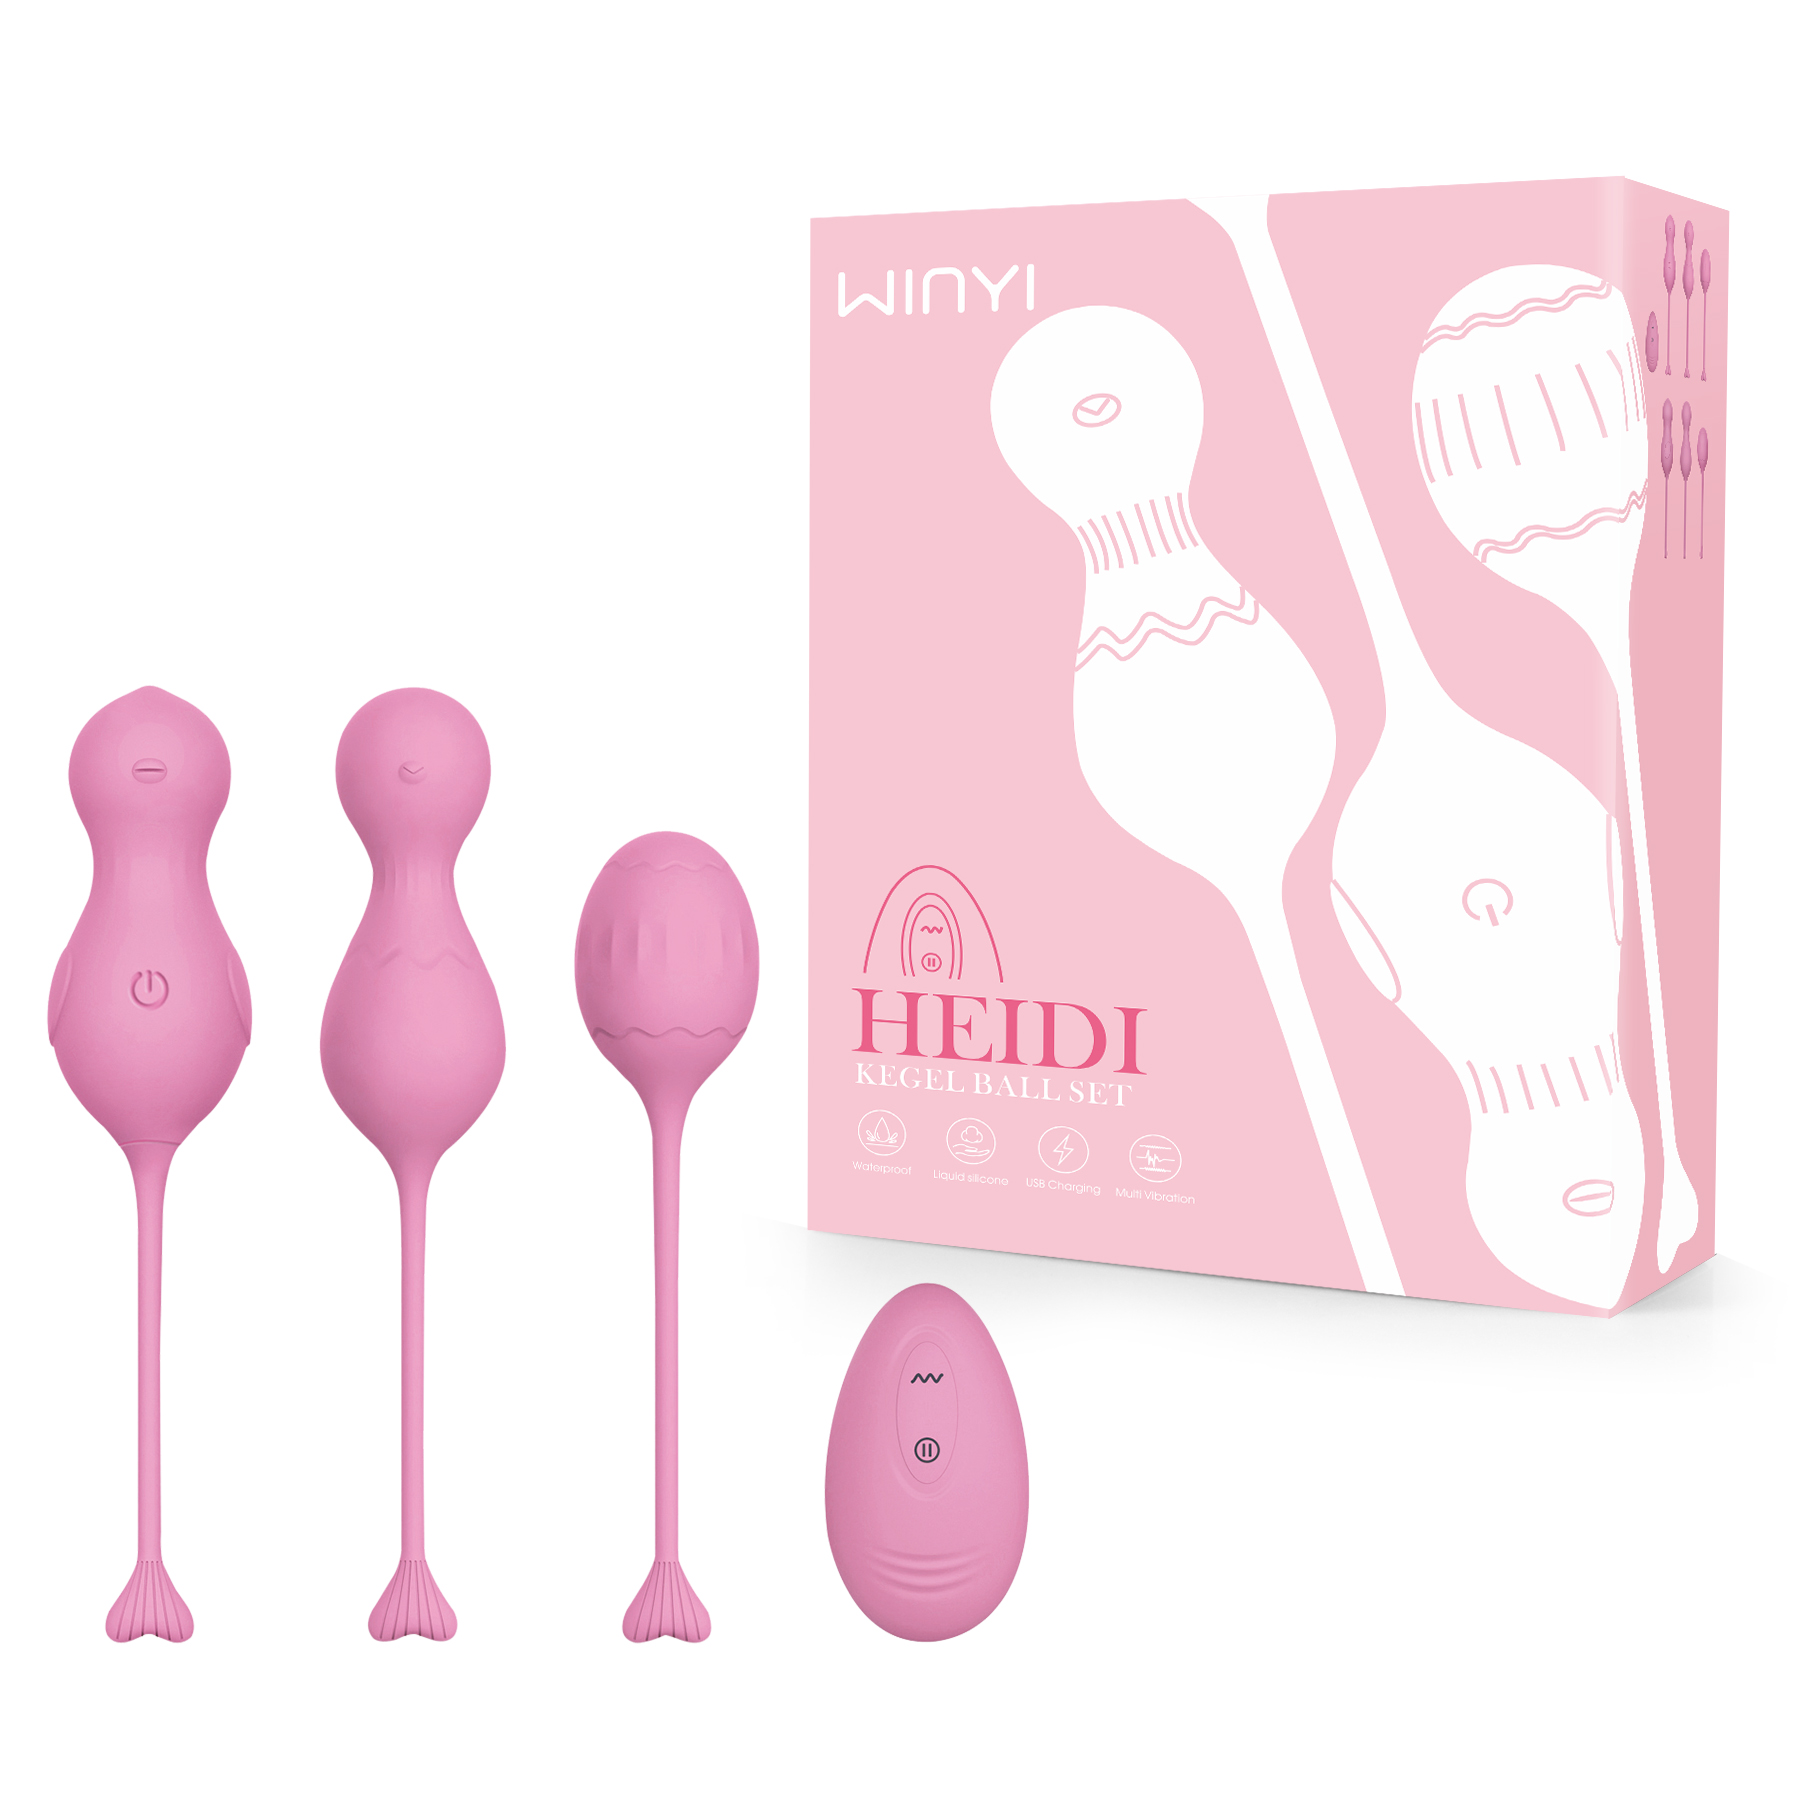 WY0571-Kegel ball set-info@szwinyi.com-OEM ODM service available factory-Wide Range Of Quality Products-Industry-trusted Vendor-Private Label full customization-WINYI-Official Websiteszwinyi.com/winyi.net